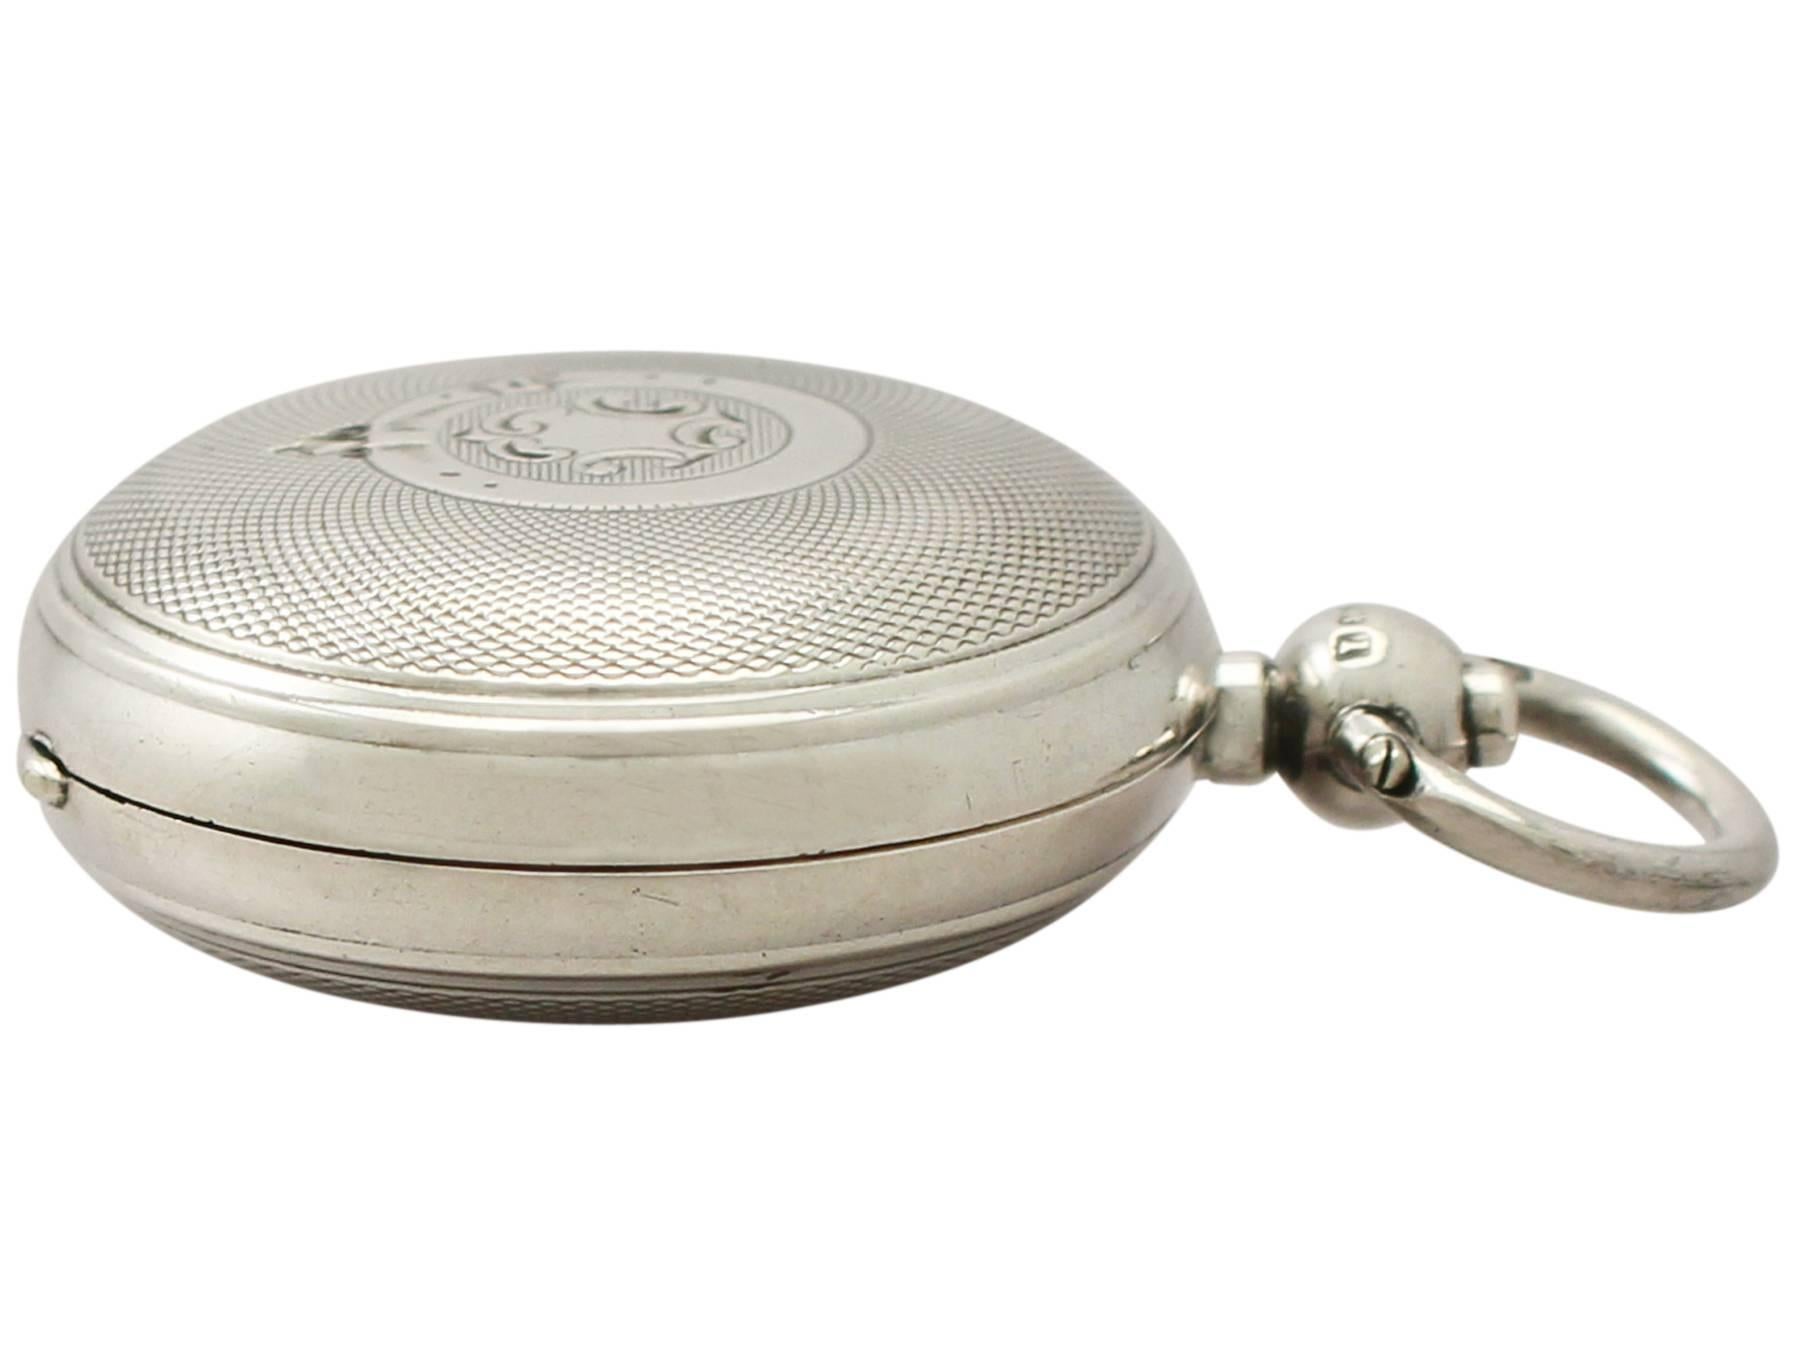 A fine and impressive, unusual antique George V English sterling silver sovereign case; an addition to our diverse box and case collection

This fine antique George V sterling silver sovereign case has a circular rounded form.

The surface of